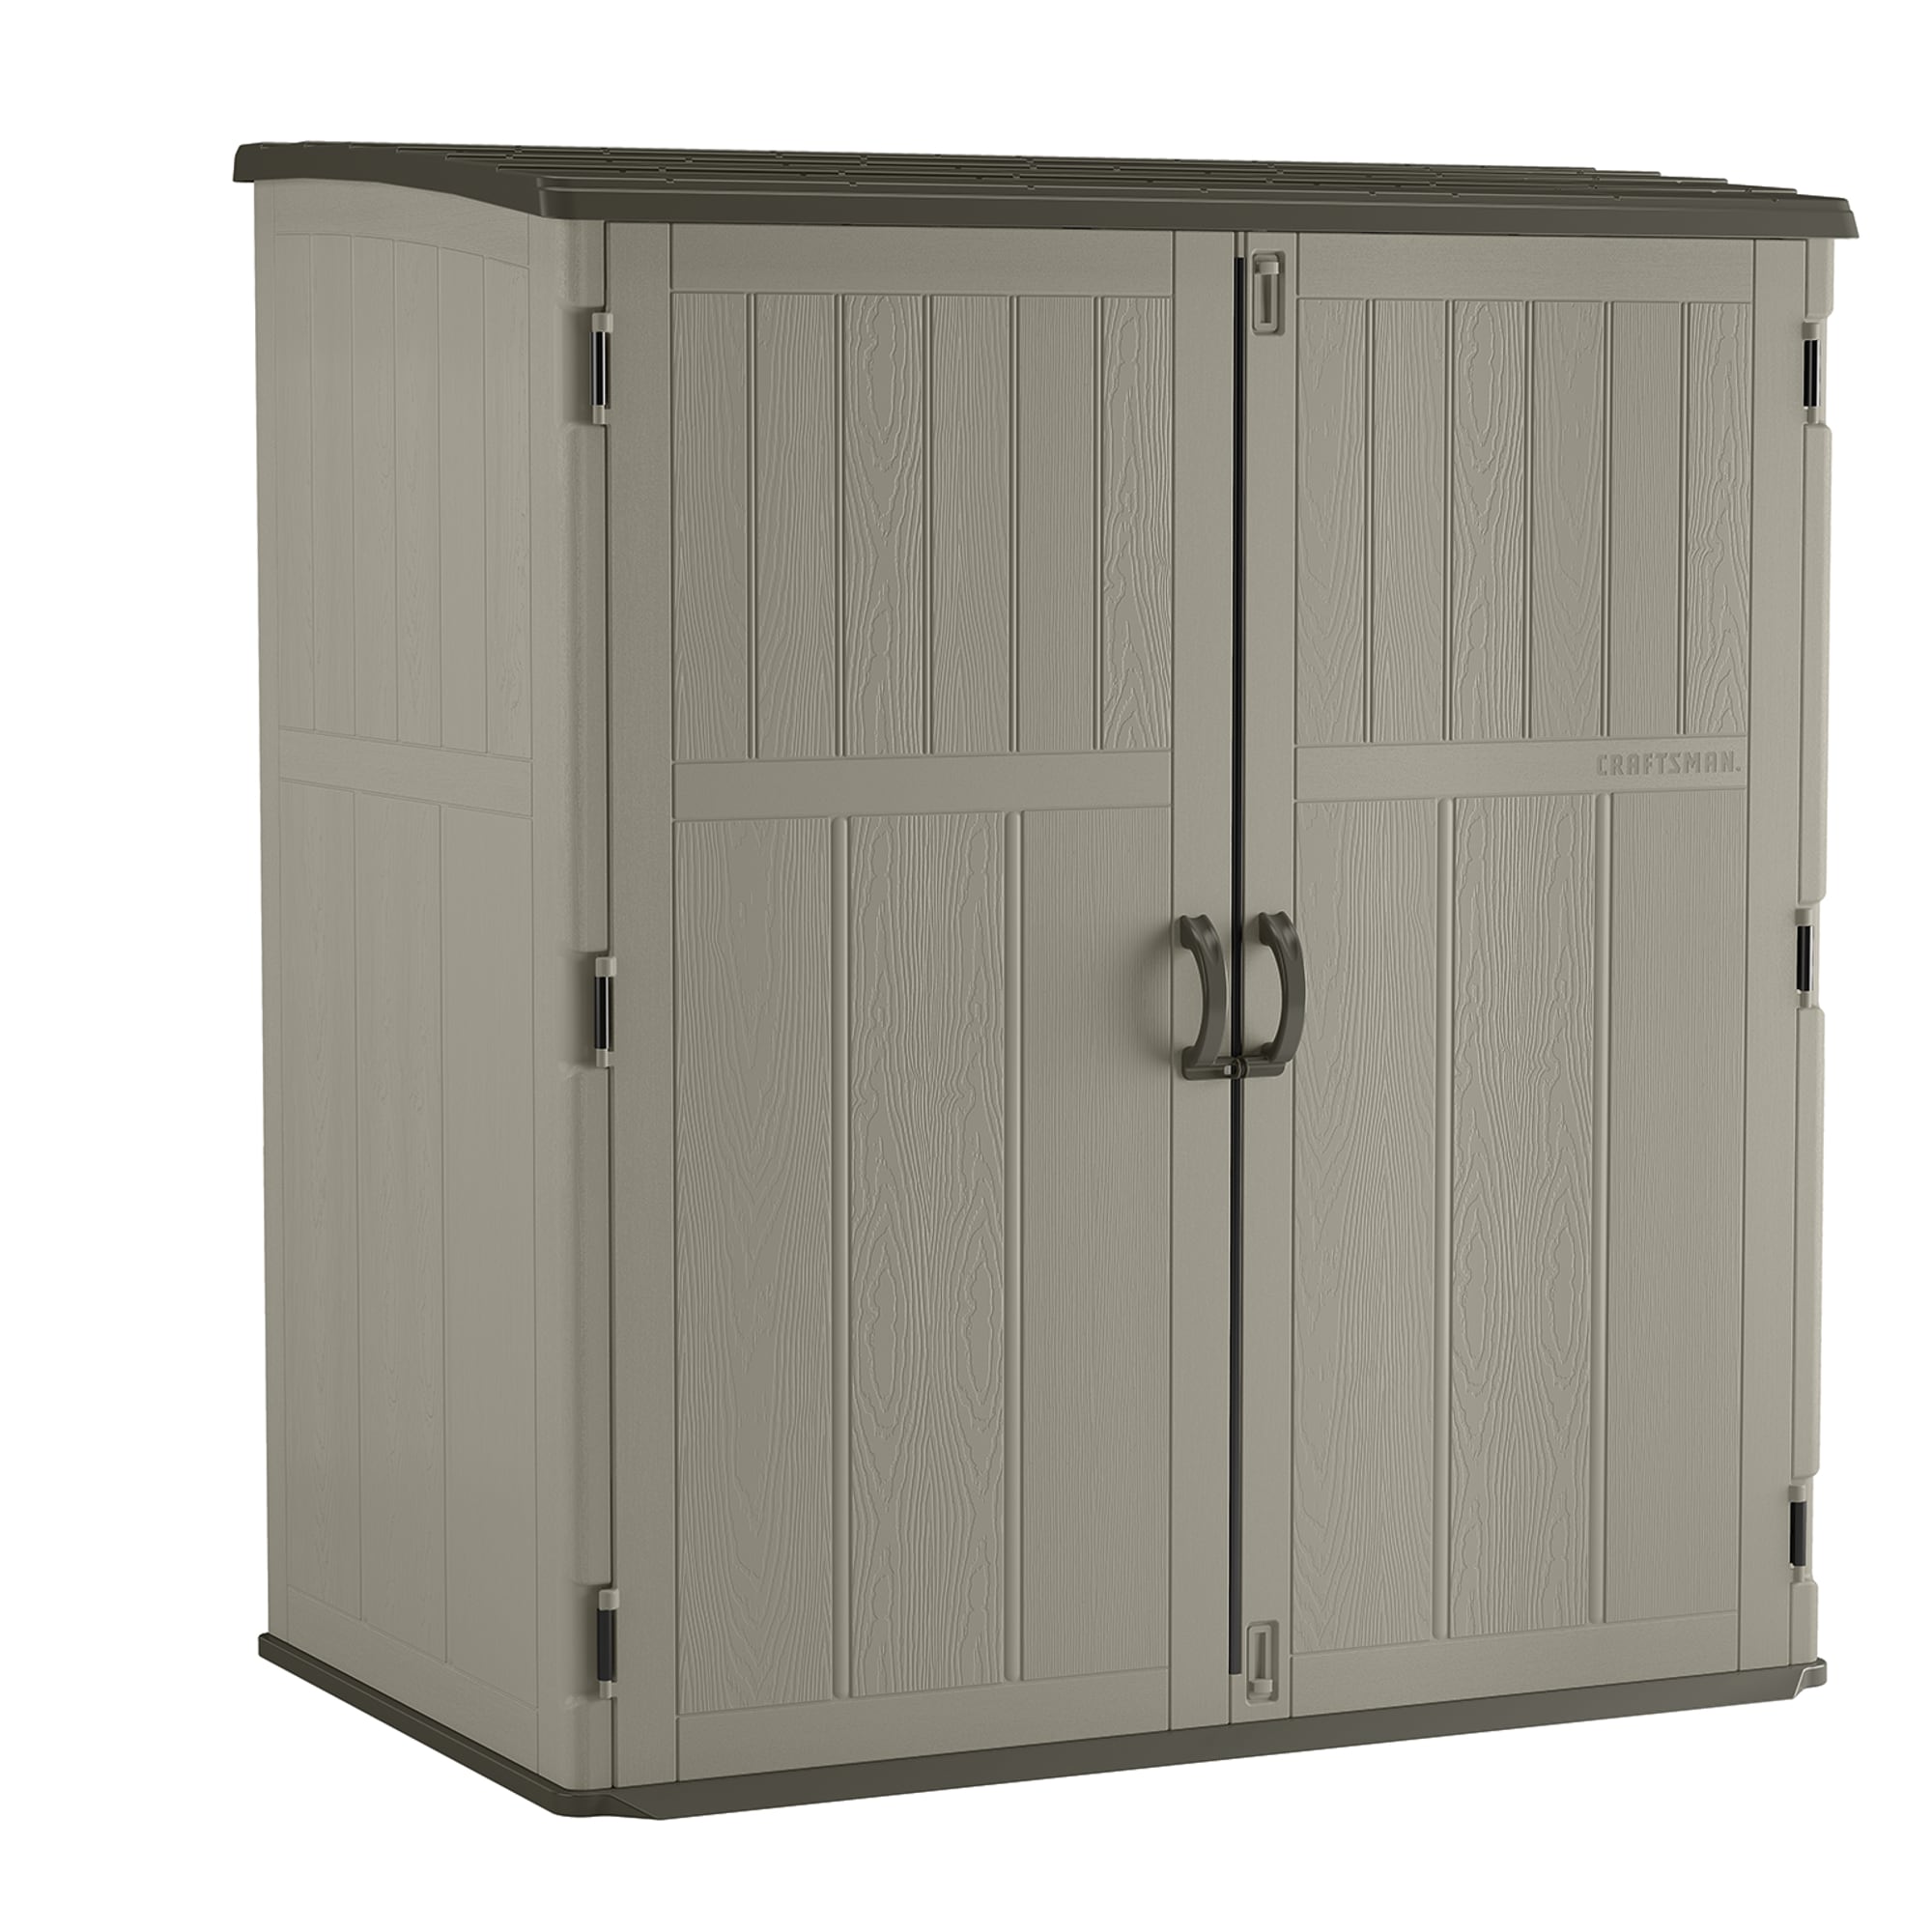 6 ft Outdoor Storage Utility Shed Patio Garden Vertical Tool Cabinet Resin  Box